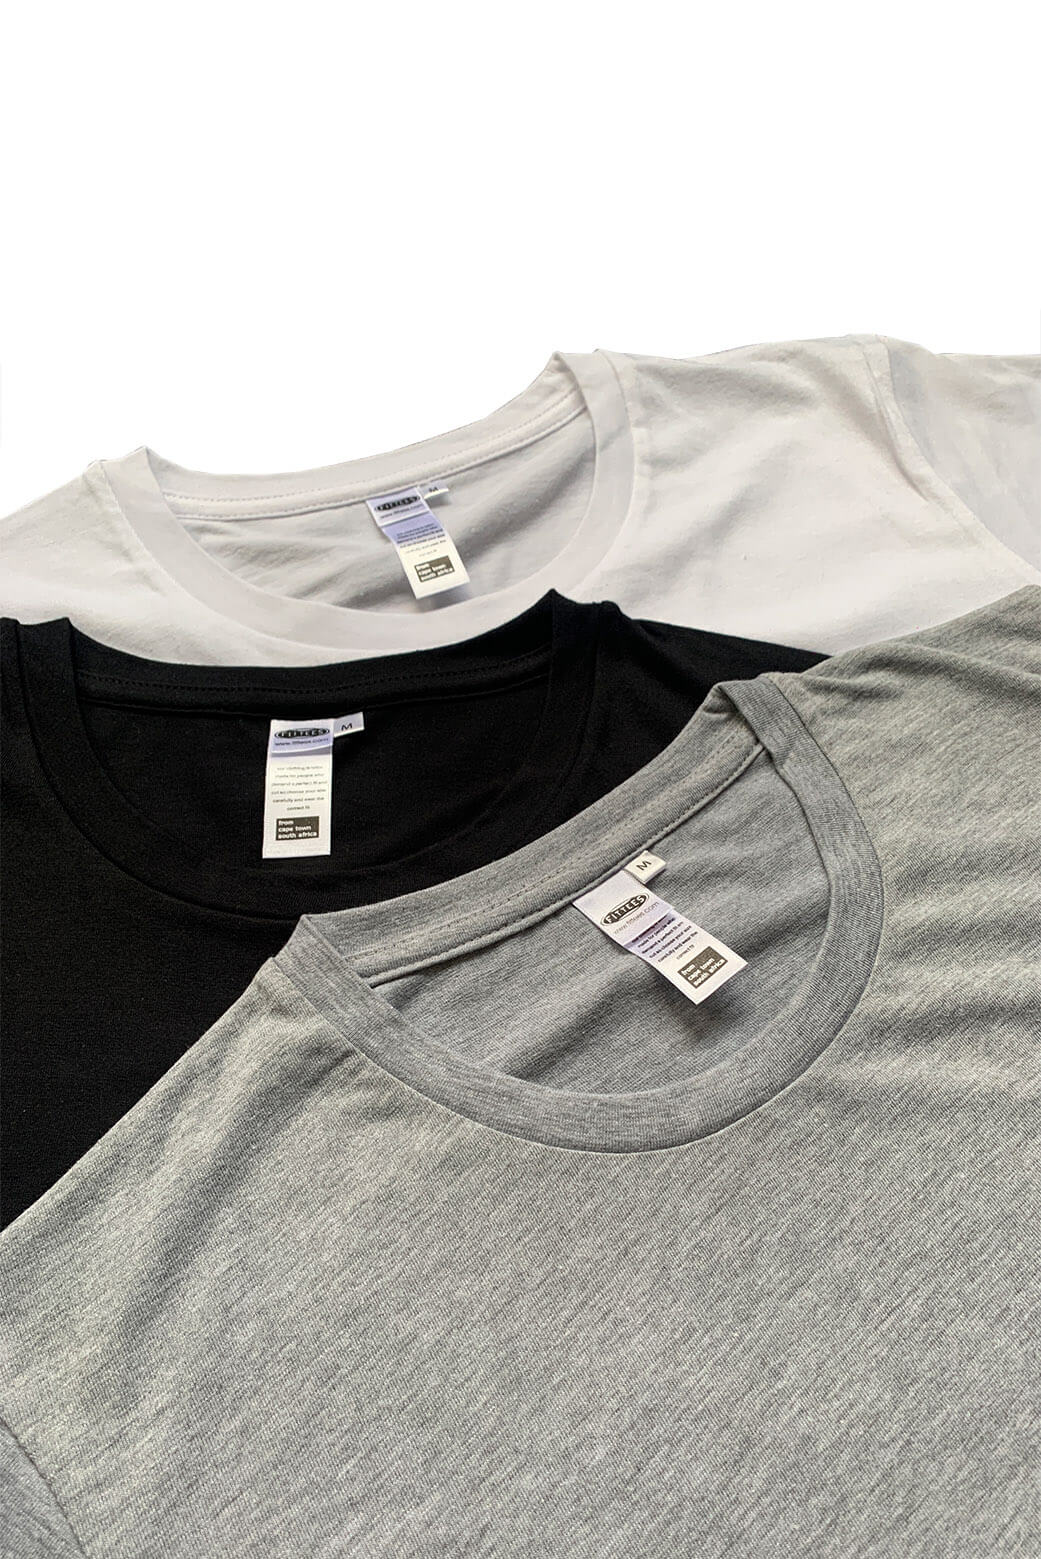 3 x Premium Fitted T-Shirts for R295